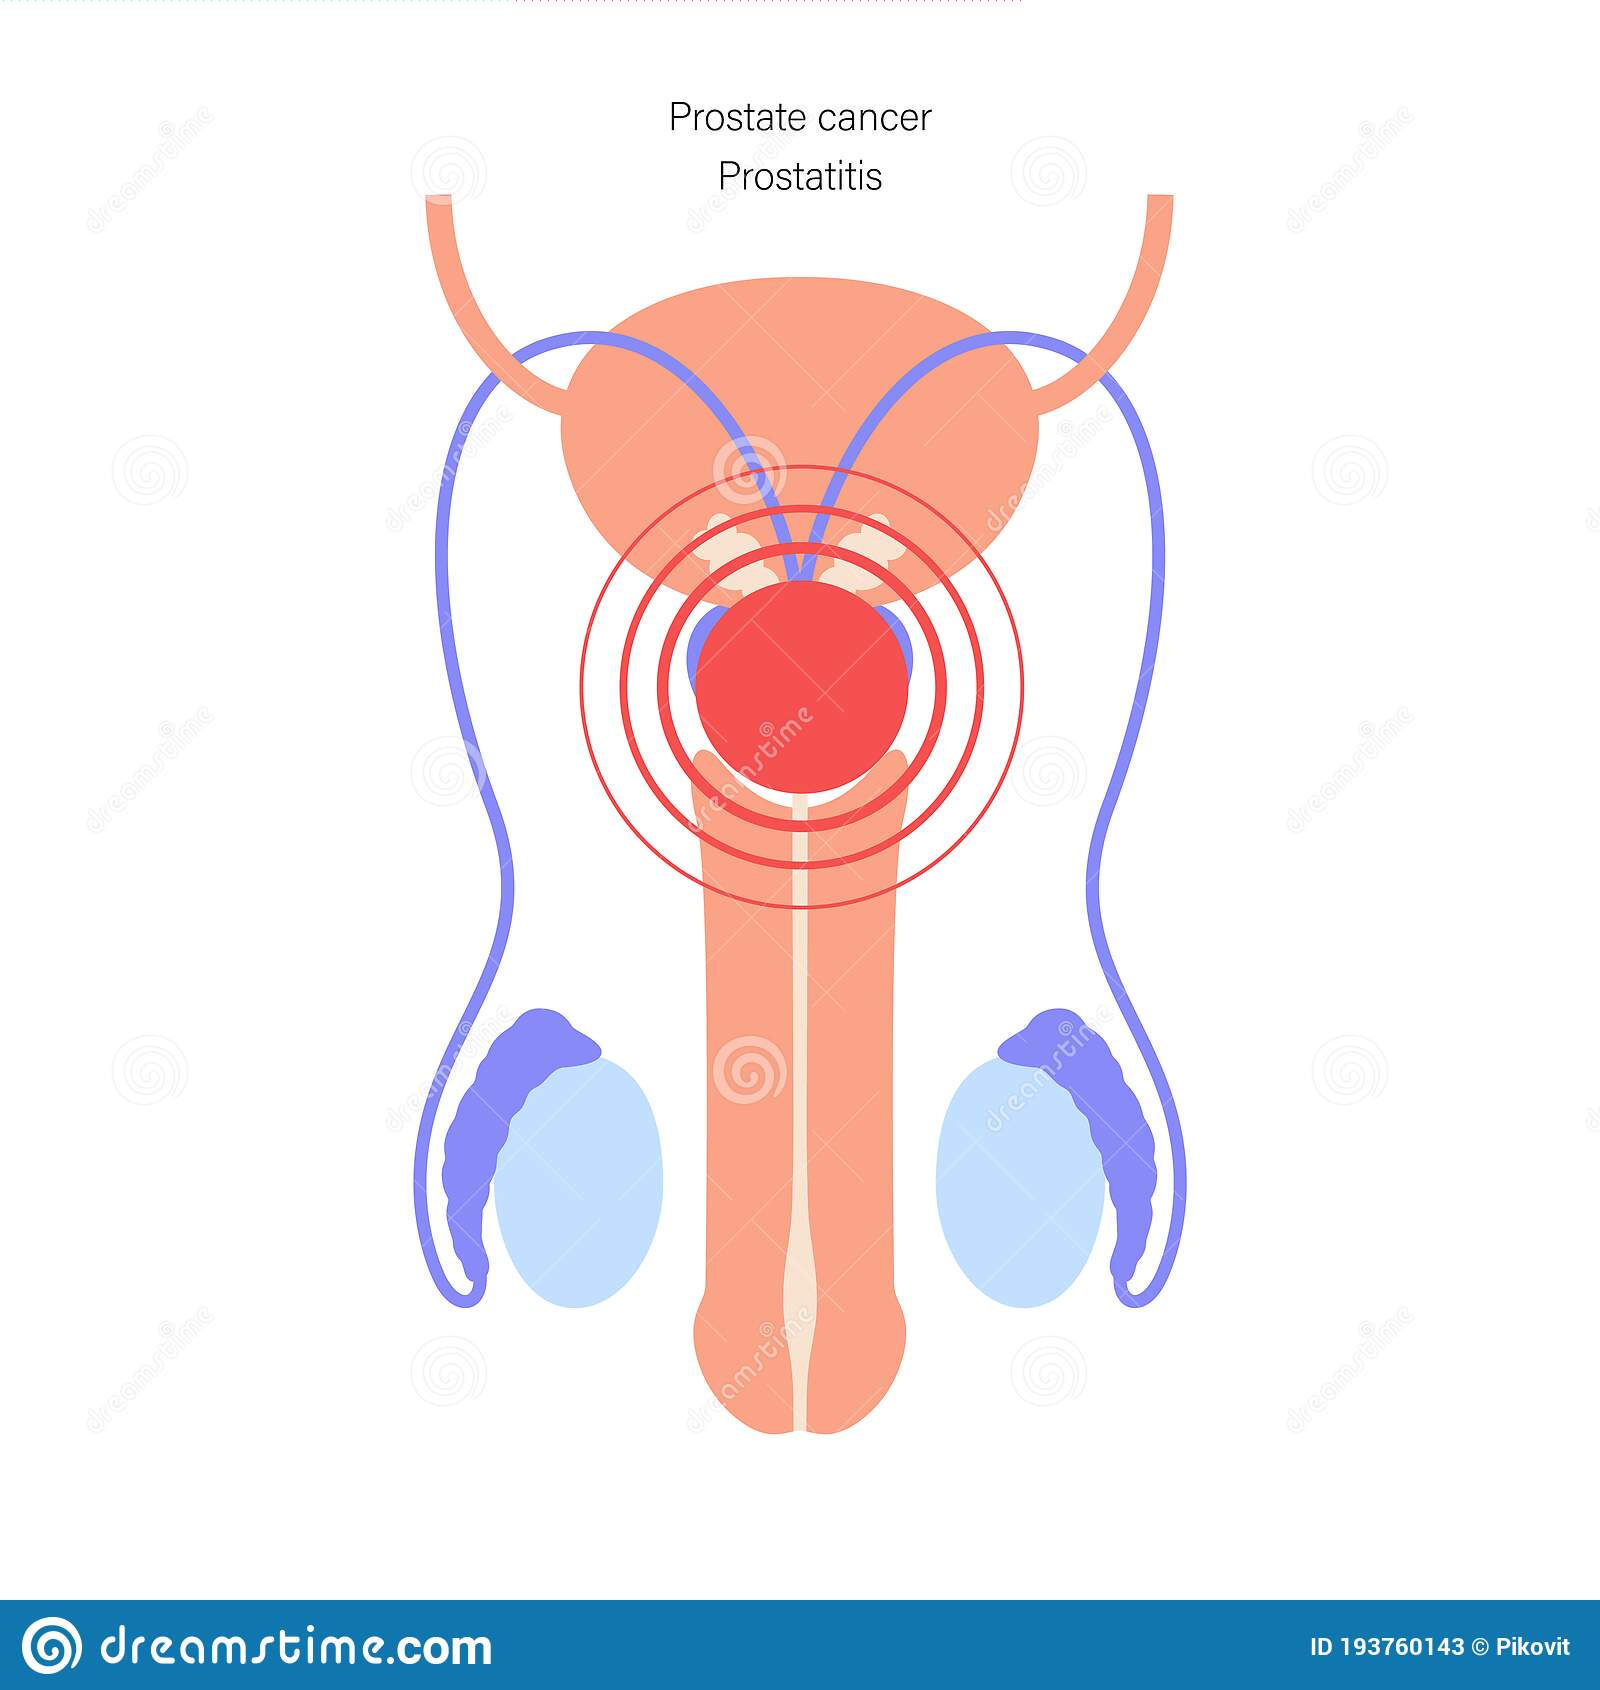 Male reproductive system stock vector. Illustration of health